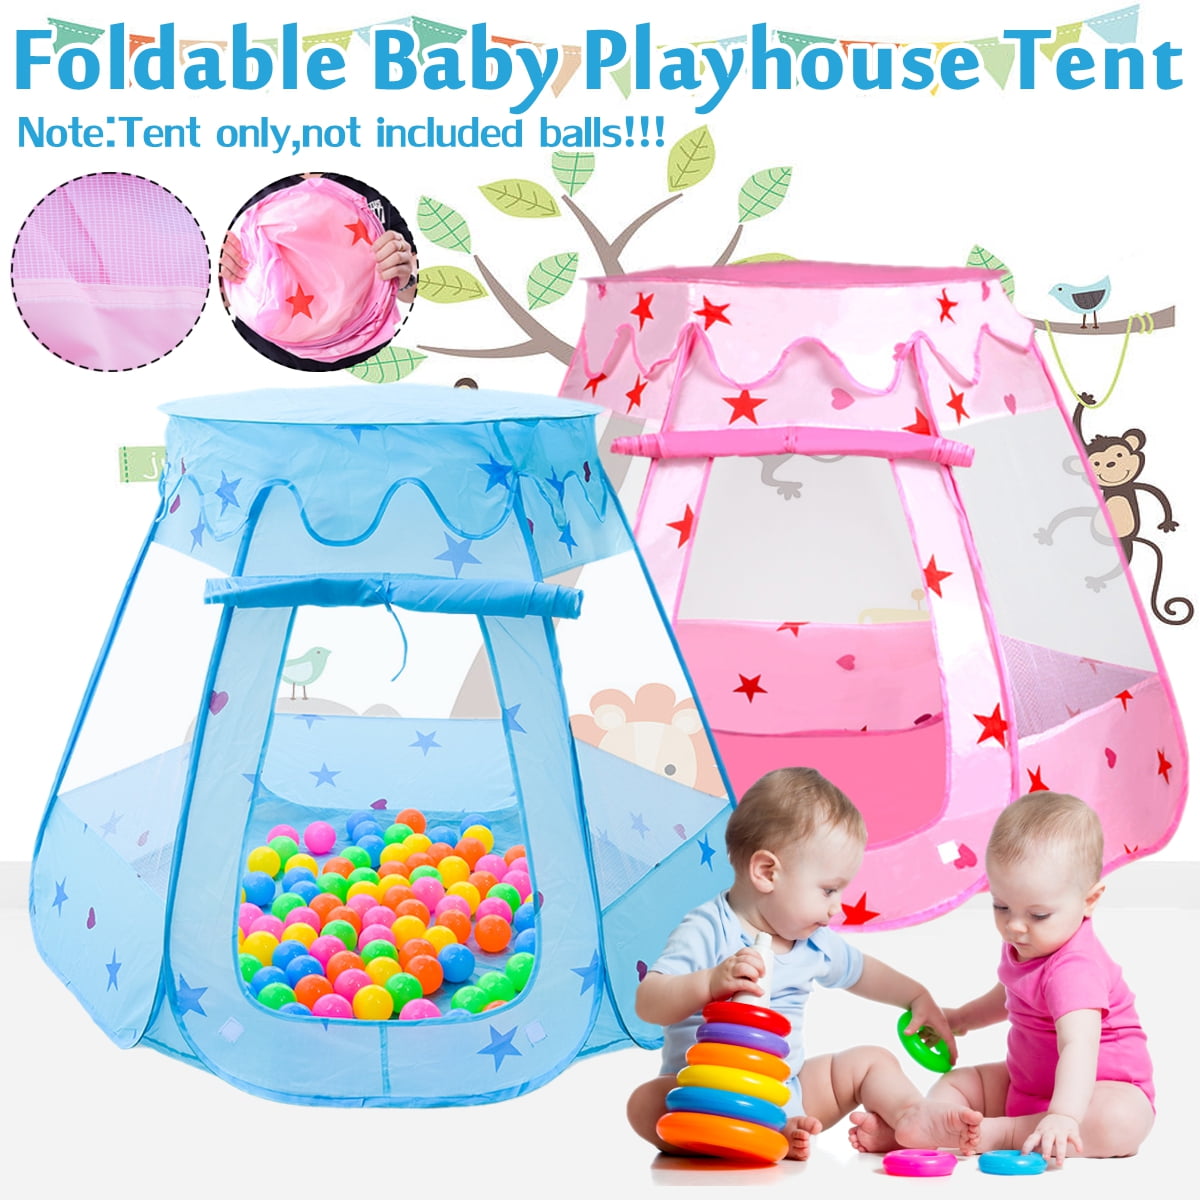 New Children Kid Ocean Ball Pit Pool Game Play Tent W/ Ball Indoor/Outdoor Gifts 